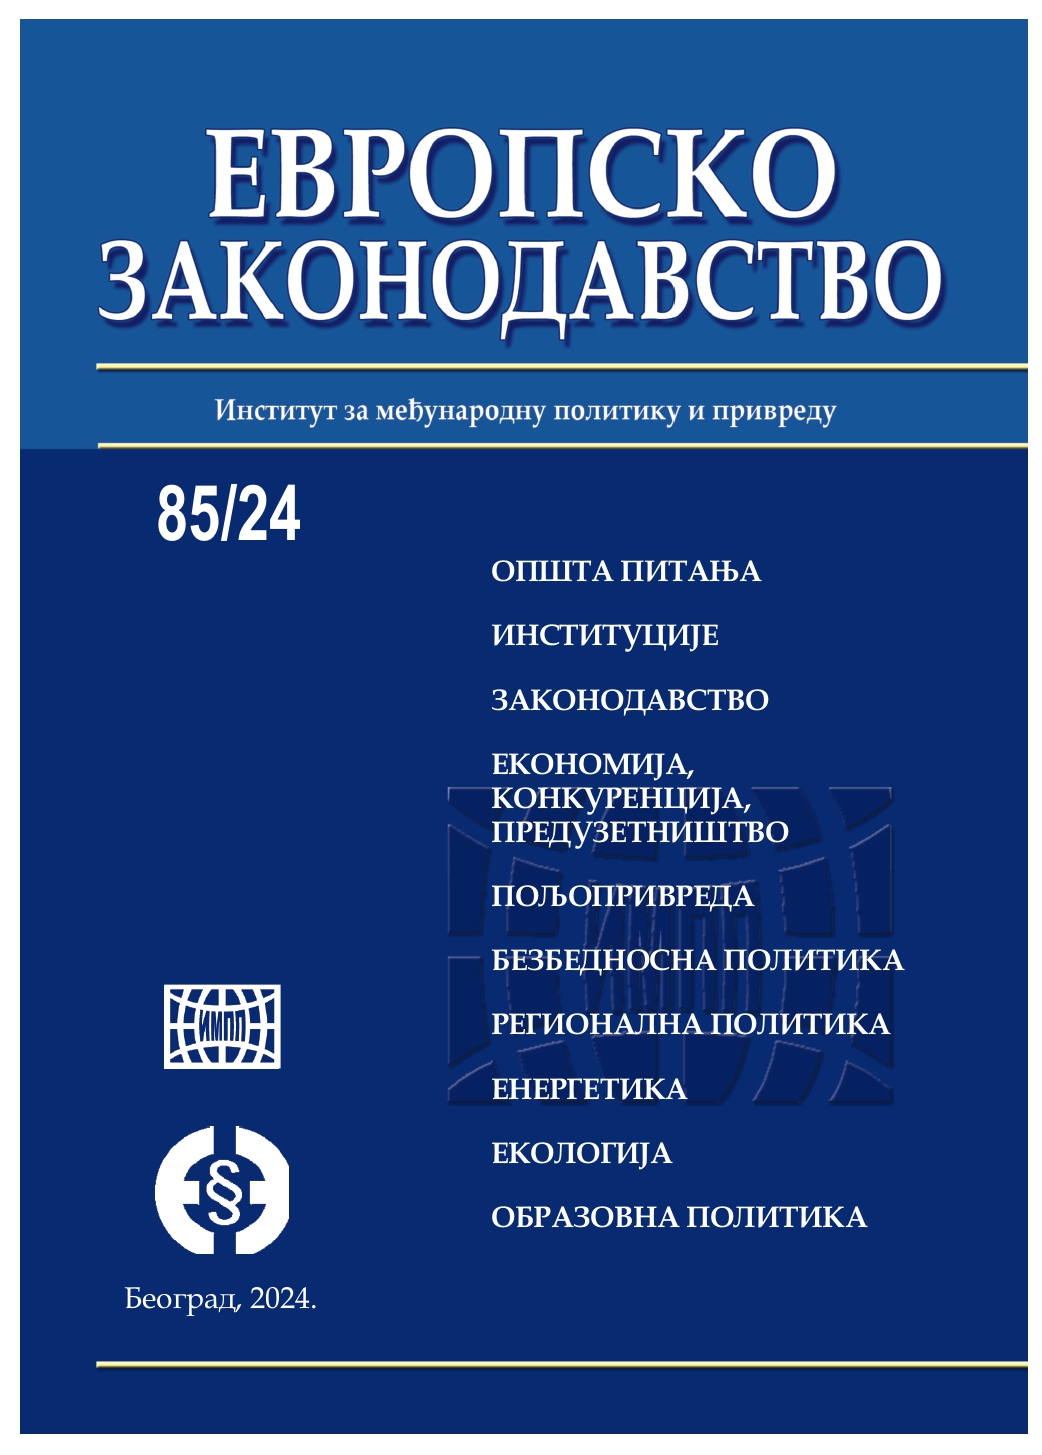 The role of the Working community/Alps-Adriatic alliance in the post-yugoslav area Cover Image